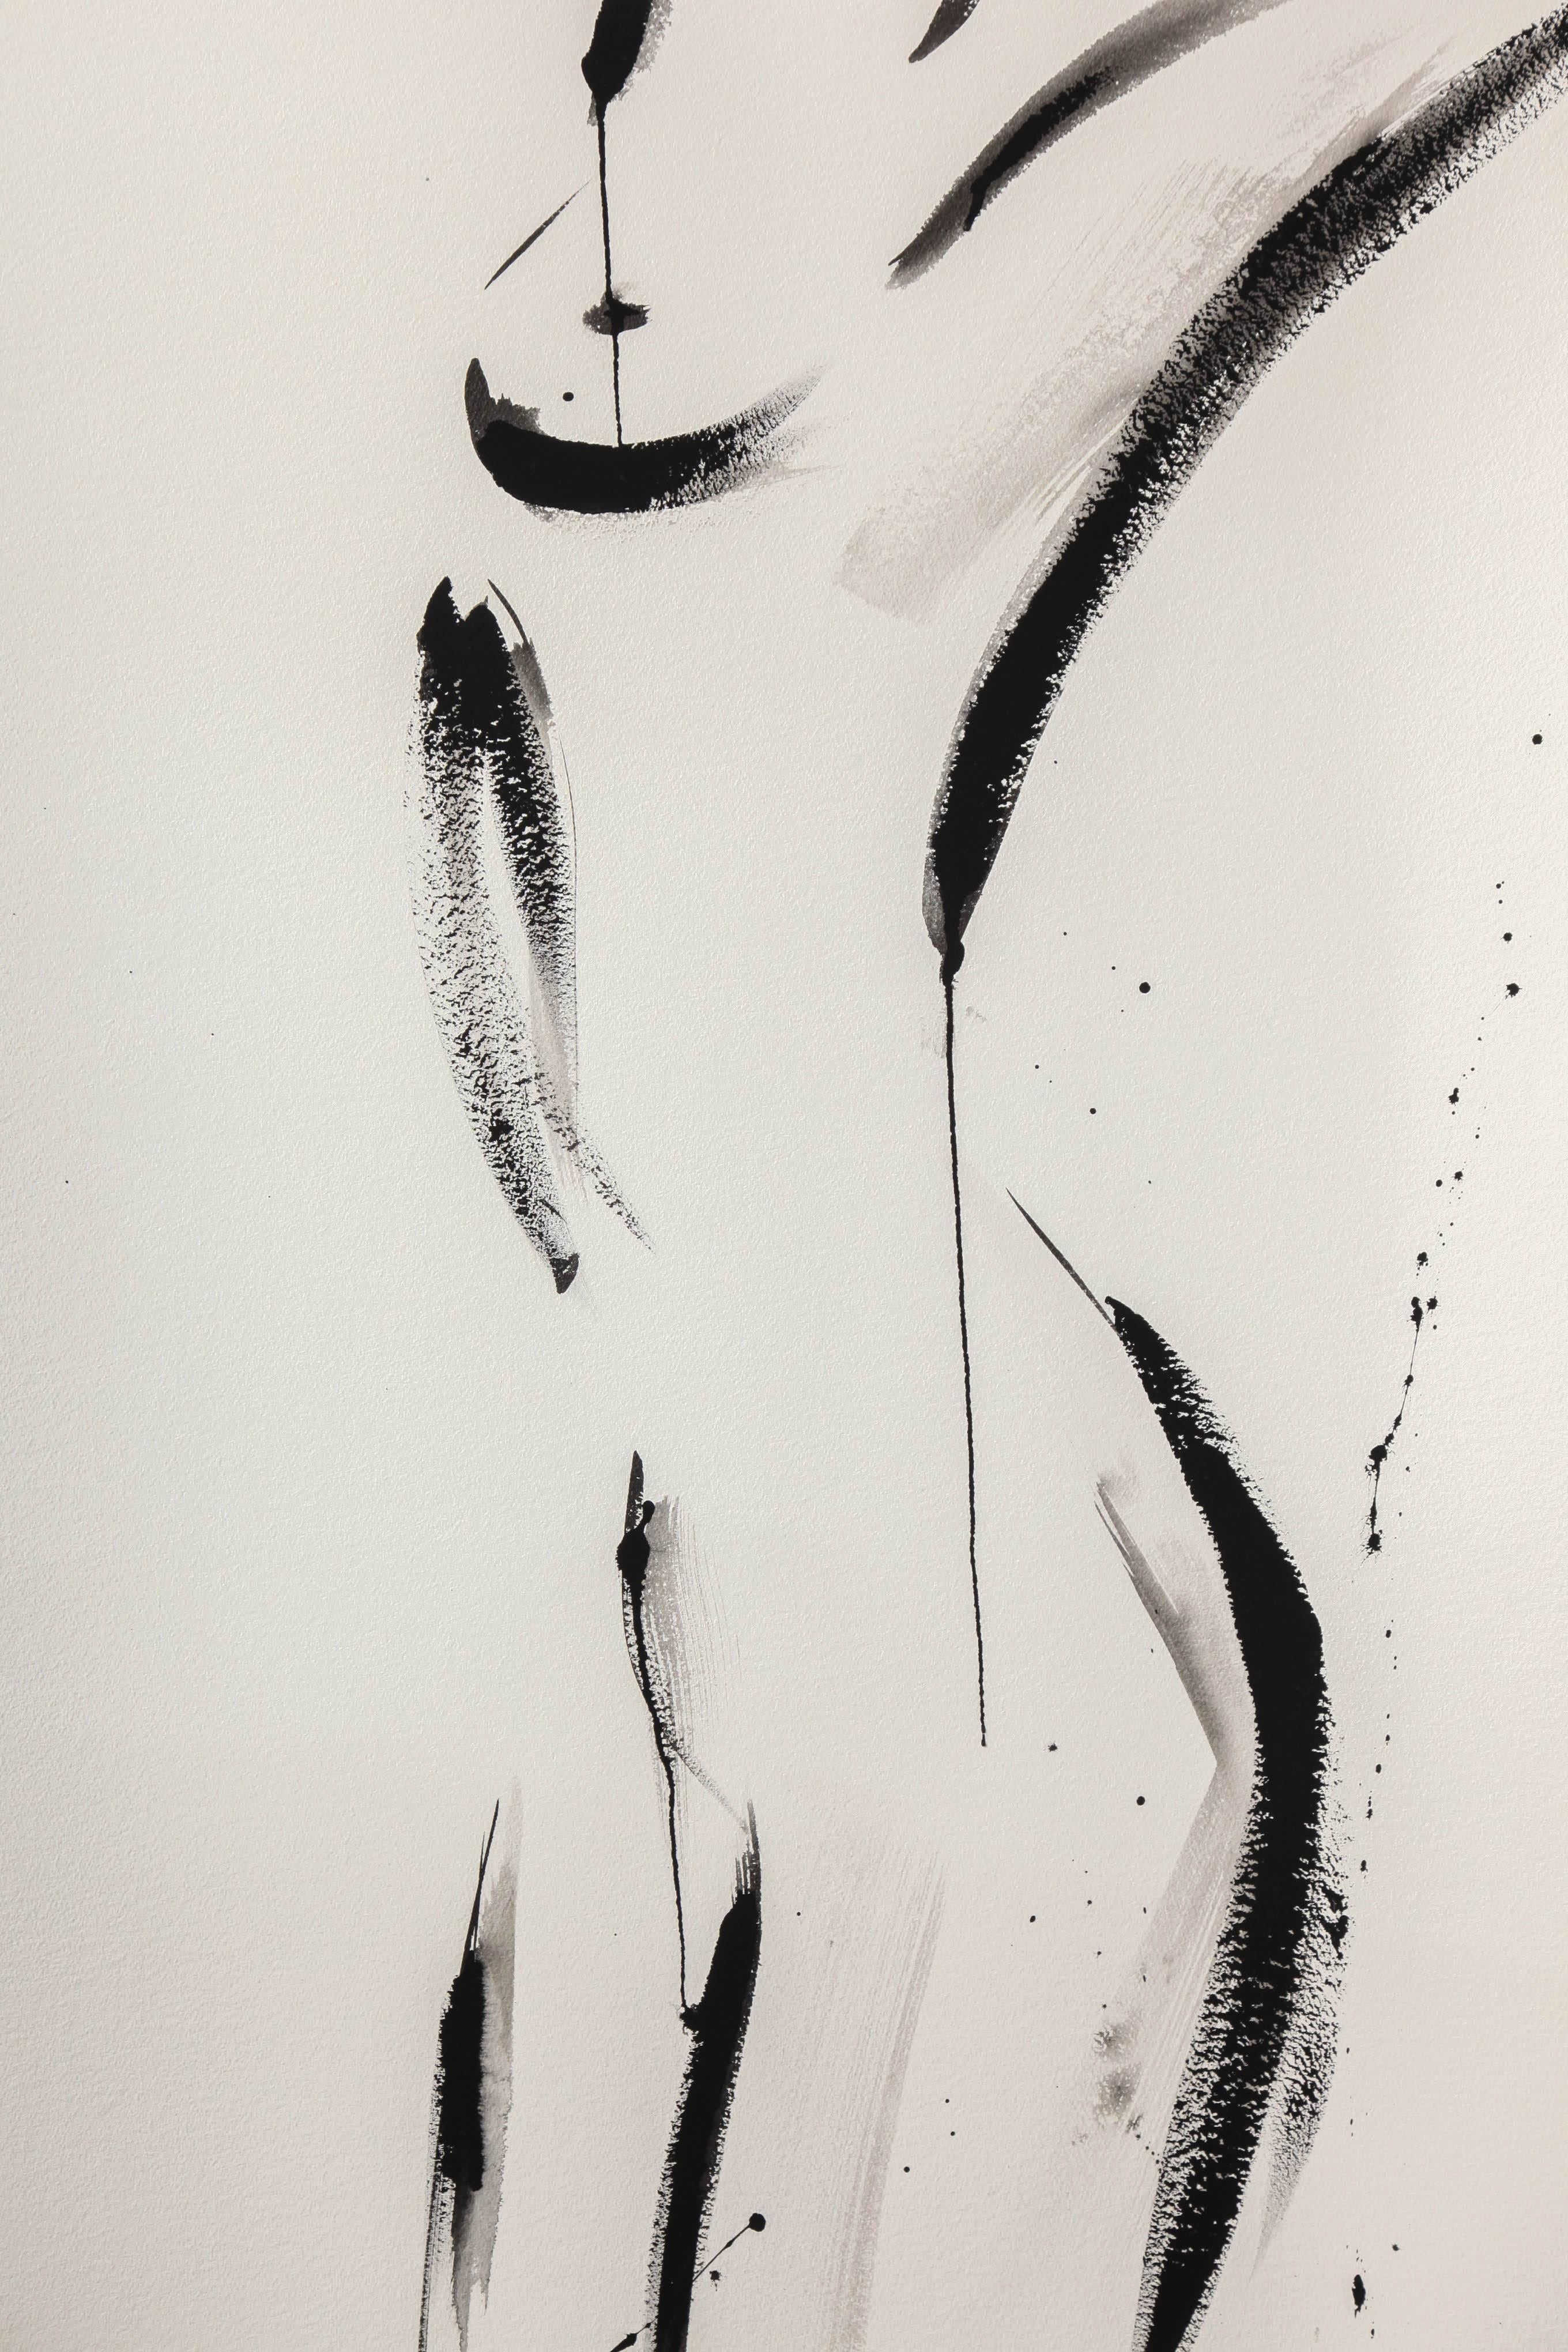 Beautiful nude painting by Jenna Snyder-Phillips. Sumi ink, charcoal and lacquer on 100% cotton archival paper. Artist is educated in Italy and USA.